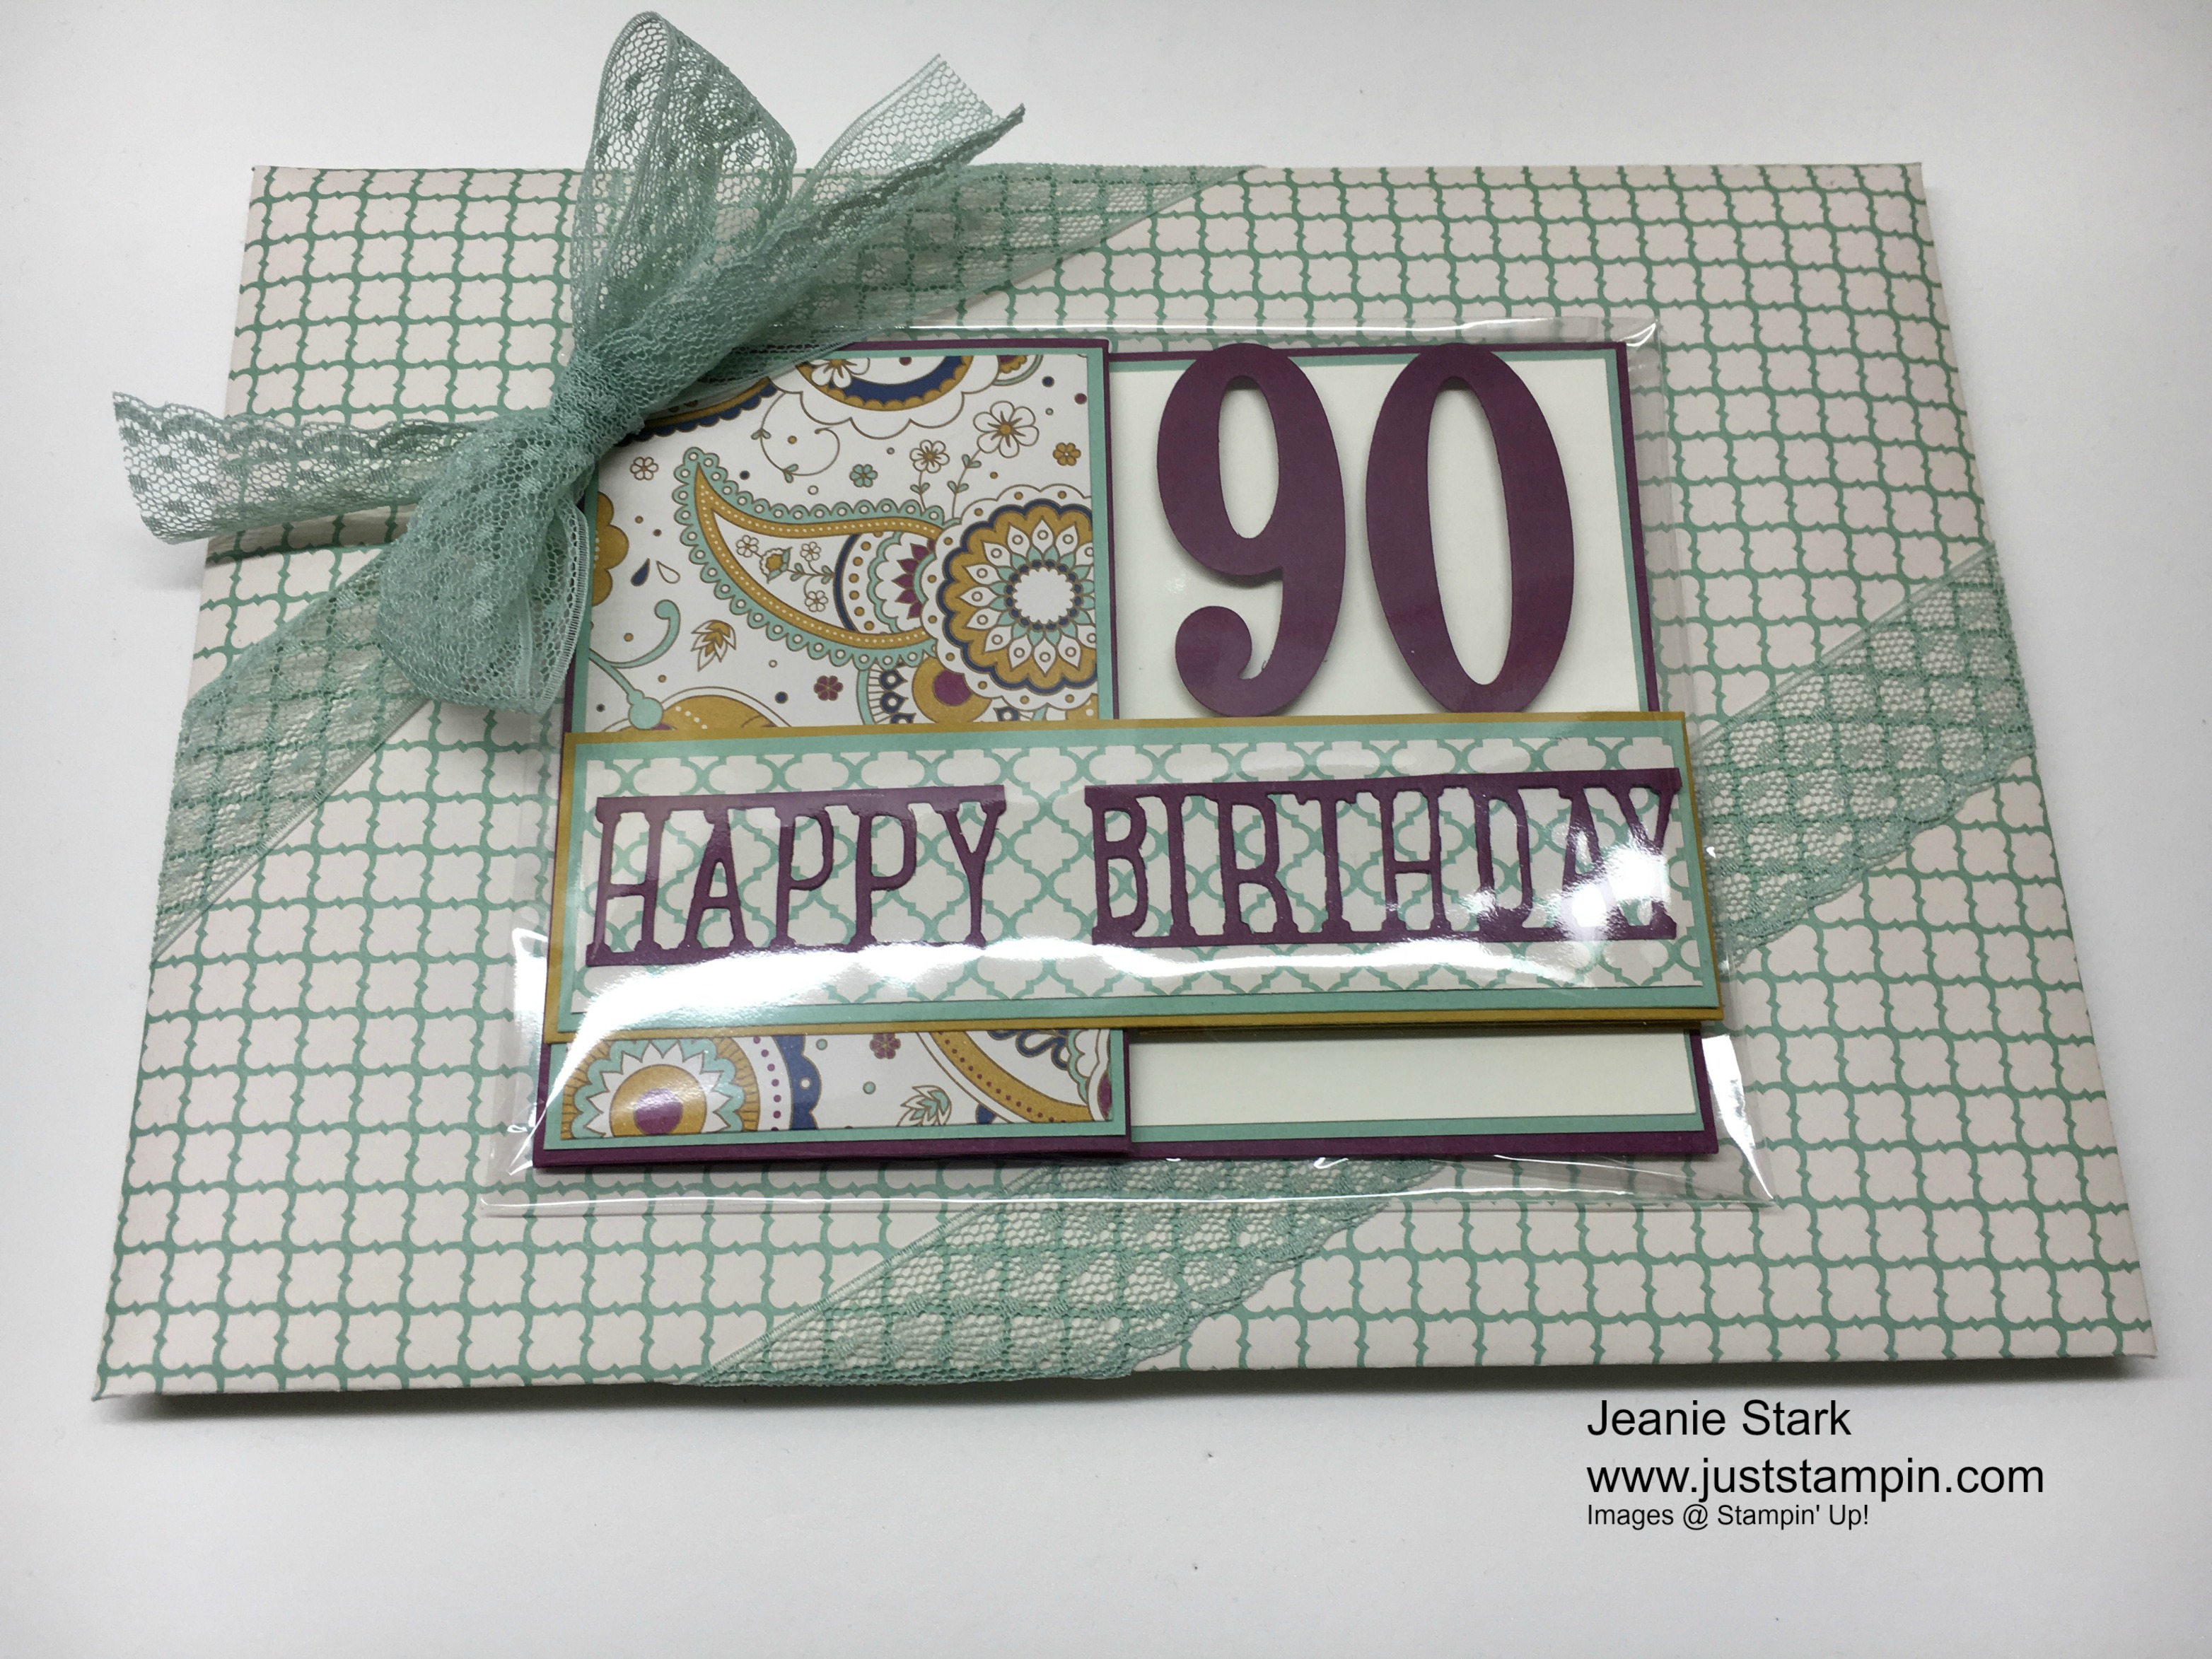 Stampin Up 90th Birthday card idea using Party Pop Up Thinlits and Large Numbers Framelits - Jeanie Stark StampinUp